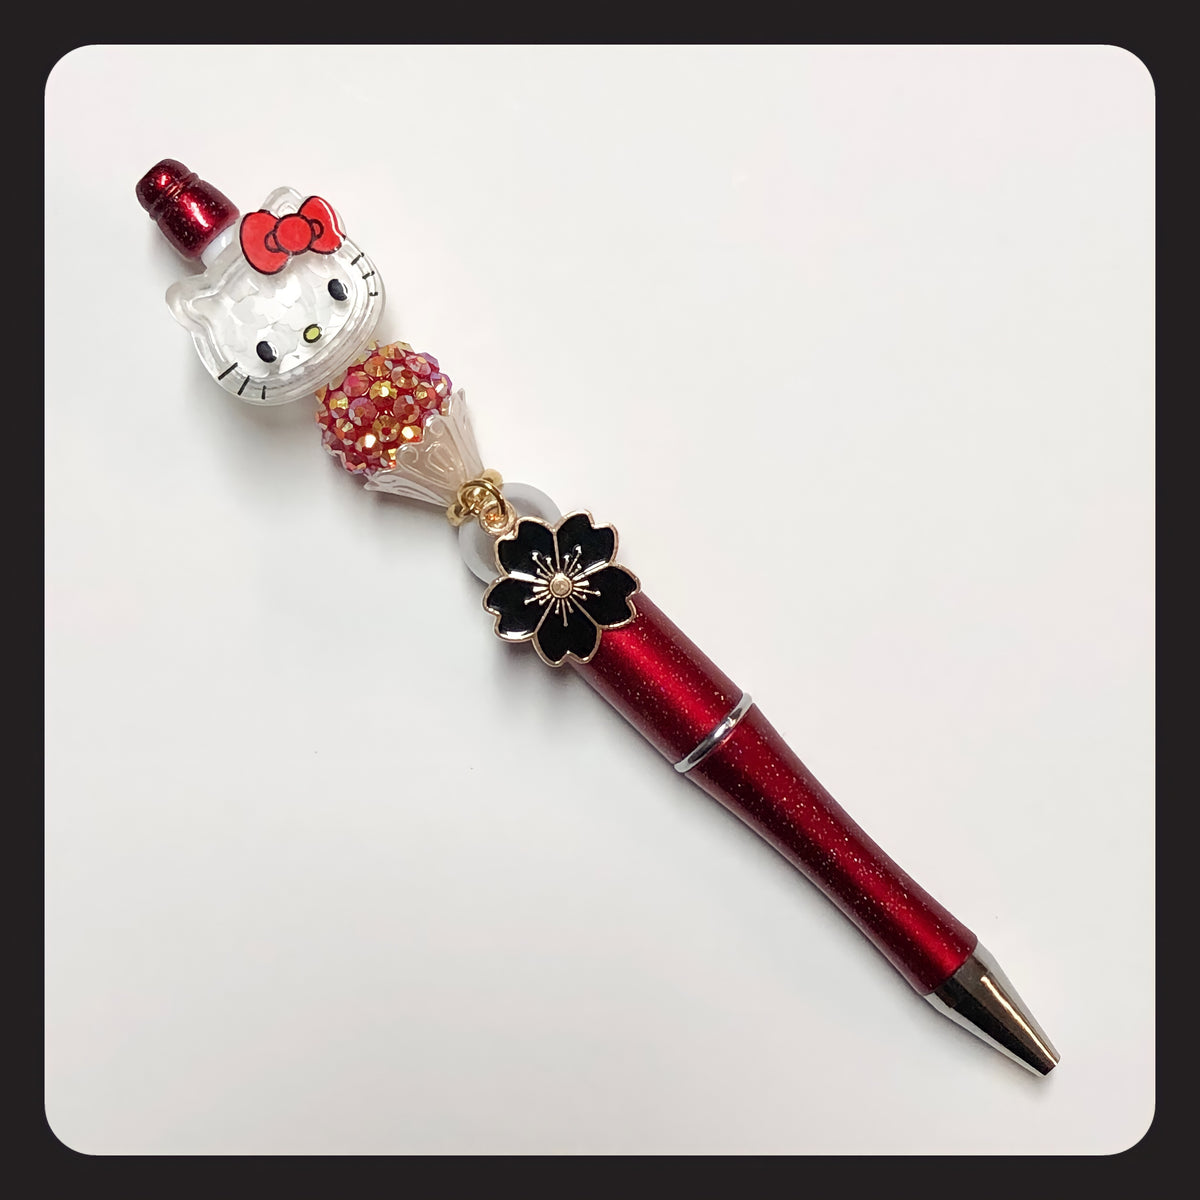 Pair Of Adorable Hello Kitty Pens! for Sale in Edinburg, TX - OfferUp